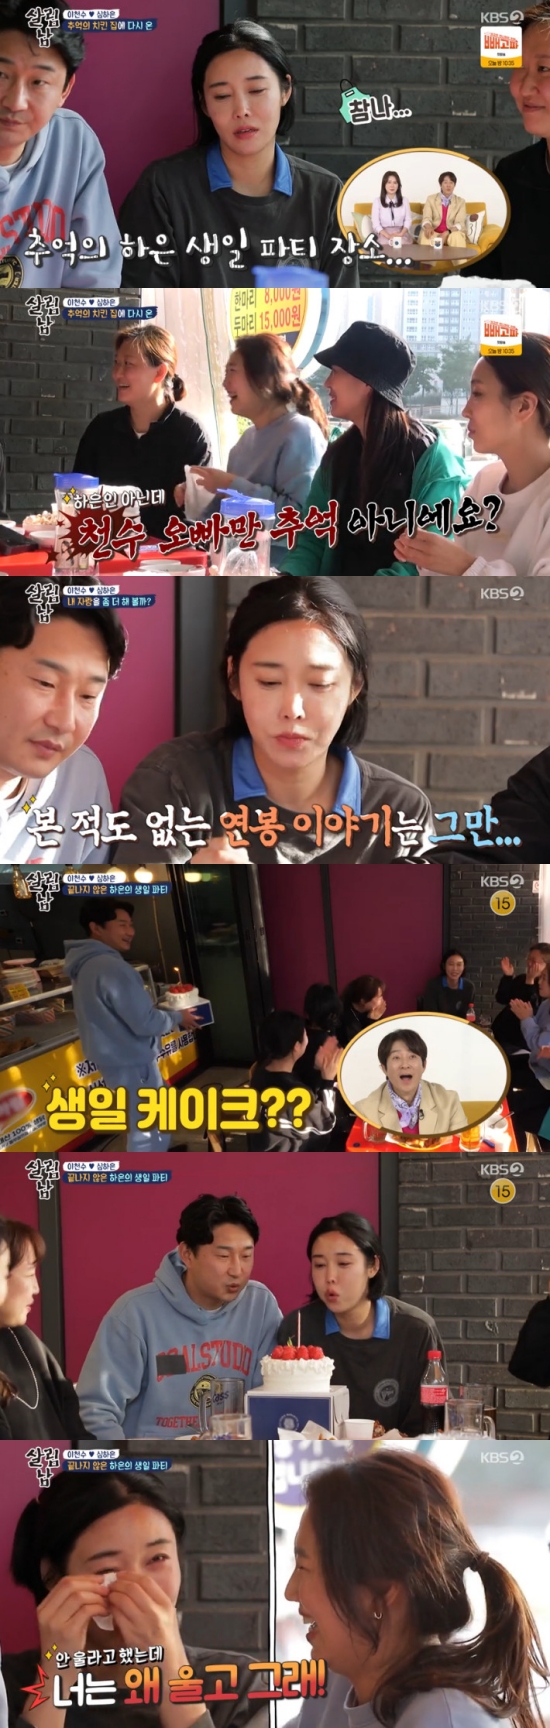 Former footballer Lee Chun-soo helped train model Shim Ha-eun.On the 30th KBS 2TV Saving Men Season 2, Lee Chun-soo prepared the event for Shim Ha-eun.On this day, Shim Ha-eun said that there is a place to go with the sheep, and Lee Chun-soo said, Do you always leave me alone? Where are you going?Shim Ha-eun said, Im going to work out, Im going to football, and Lee Chun-soo condescending, Im Lee Chun-soo, do you coach me?Shim Ha-eun said, We have a coach, and Lee Chun-soo wondered, Why is Ju Eun going together?Hes our football team manager, Shim Ha-eun added.Shim Ha-eun said, In two weeks, there will be a moms soccer tournament in my district. Our group will also go to Kyonggi as a team.I am going to train strongly as a huge claim. Eventually Lee Chun-soo followed Shim Ha-eun to the soccer field, and Shim Ha-eun said, We are in the coach and do not come in.Lee Chun-soo watched the training and gave a medal, and Lee Joo-eun said, Just think of your dad as a tourist watching Kyonggi.In particular, Shim Ha-eun and Lee Chun-soo became battled as other teams in Futsal Kyonggi, while Shim Ha-eun led the team to victory.Team members planned to go to the jumping practice after the soccer training, and encouraged them to go to your brother.Lee Chun-soo said, I did not really want to go, but I am going because of you.Eventually Lee Chun-soo visited the jumping practice area and attracted attention because he could not fit the movements properly from the time of the preparation exercise.Lee Chun-soo laughed with a rather clumsy move throughout his workout.Furthermore, Lee Chun-soo took Shim Ha-eun and his team members to the Chicken house, saying, If you exercise, you should have a cup of Chick.The Chicken house directed by Lee Chun-soo was the starting point for Shim Ha-euns birthday couple fight.Lee Chun-soo said, It is a place of memories of me and my memories. The team members said, Is not it just my brothers memories?Not only that, Lee Chun-soo said: There was no example of going straight to Spain at home (as a football player), I am the first, there are many first-time records.Shim Jung-soo, a baseball player, was 6 billion won in four years. Jang Hoons brother was 800 million won in salary. But he was the first in the whole. Shim Ha-eun said, Where did you go?Ive never seen that salary, he grumbled.Lee Chun-soo appeared with a cake, pretending to go to the bathroom, and sang a birthday song.Shim Ha-eun wept, and Lee Chun-soo said, Im ready for everything, this is my husband.Shim Ha-eun said, I thought, But I have only my husband.Photo = KBS Broadcasting Screen